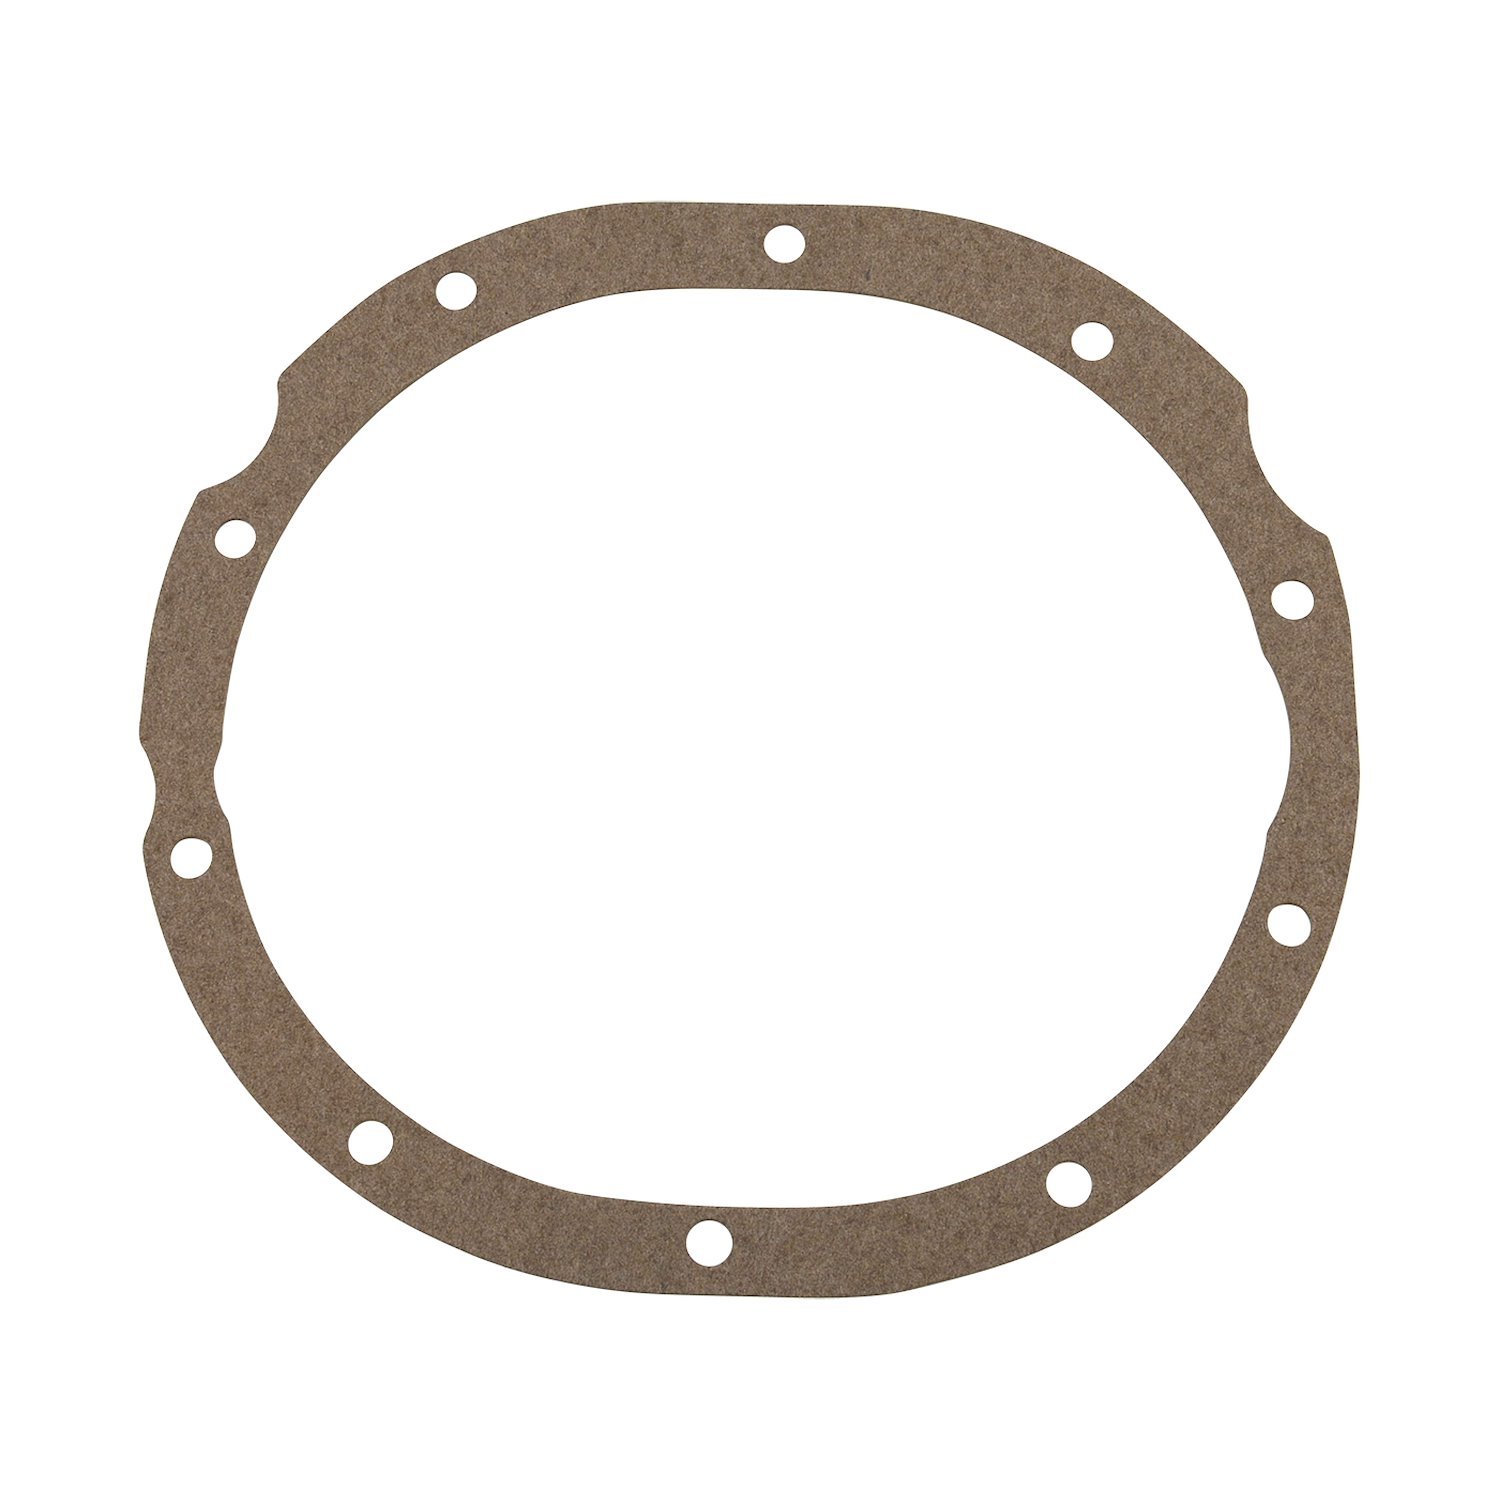 Rear End Cover Gasket Ford 9"